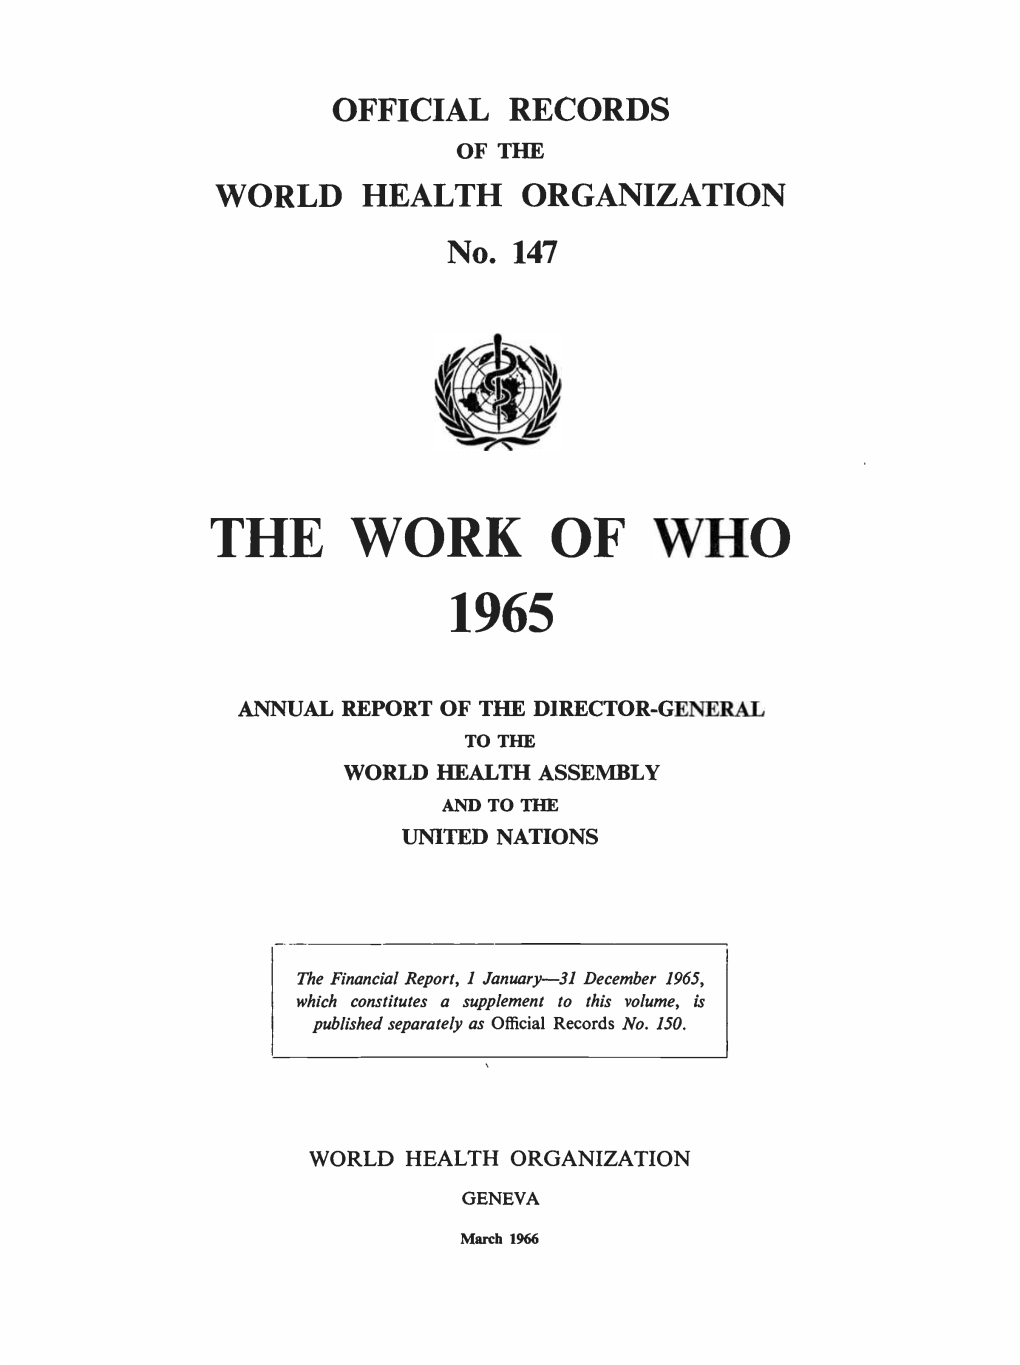 The Work of Who 1965